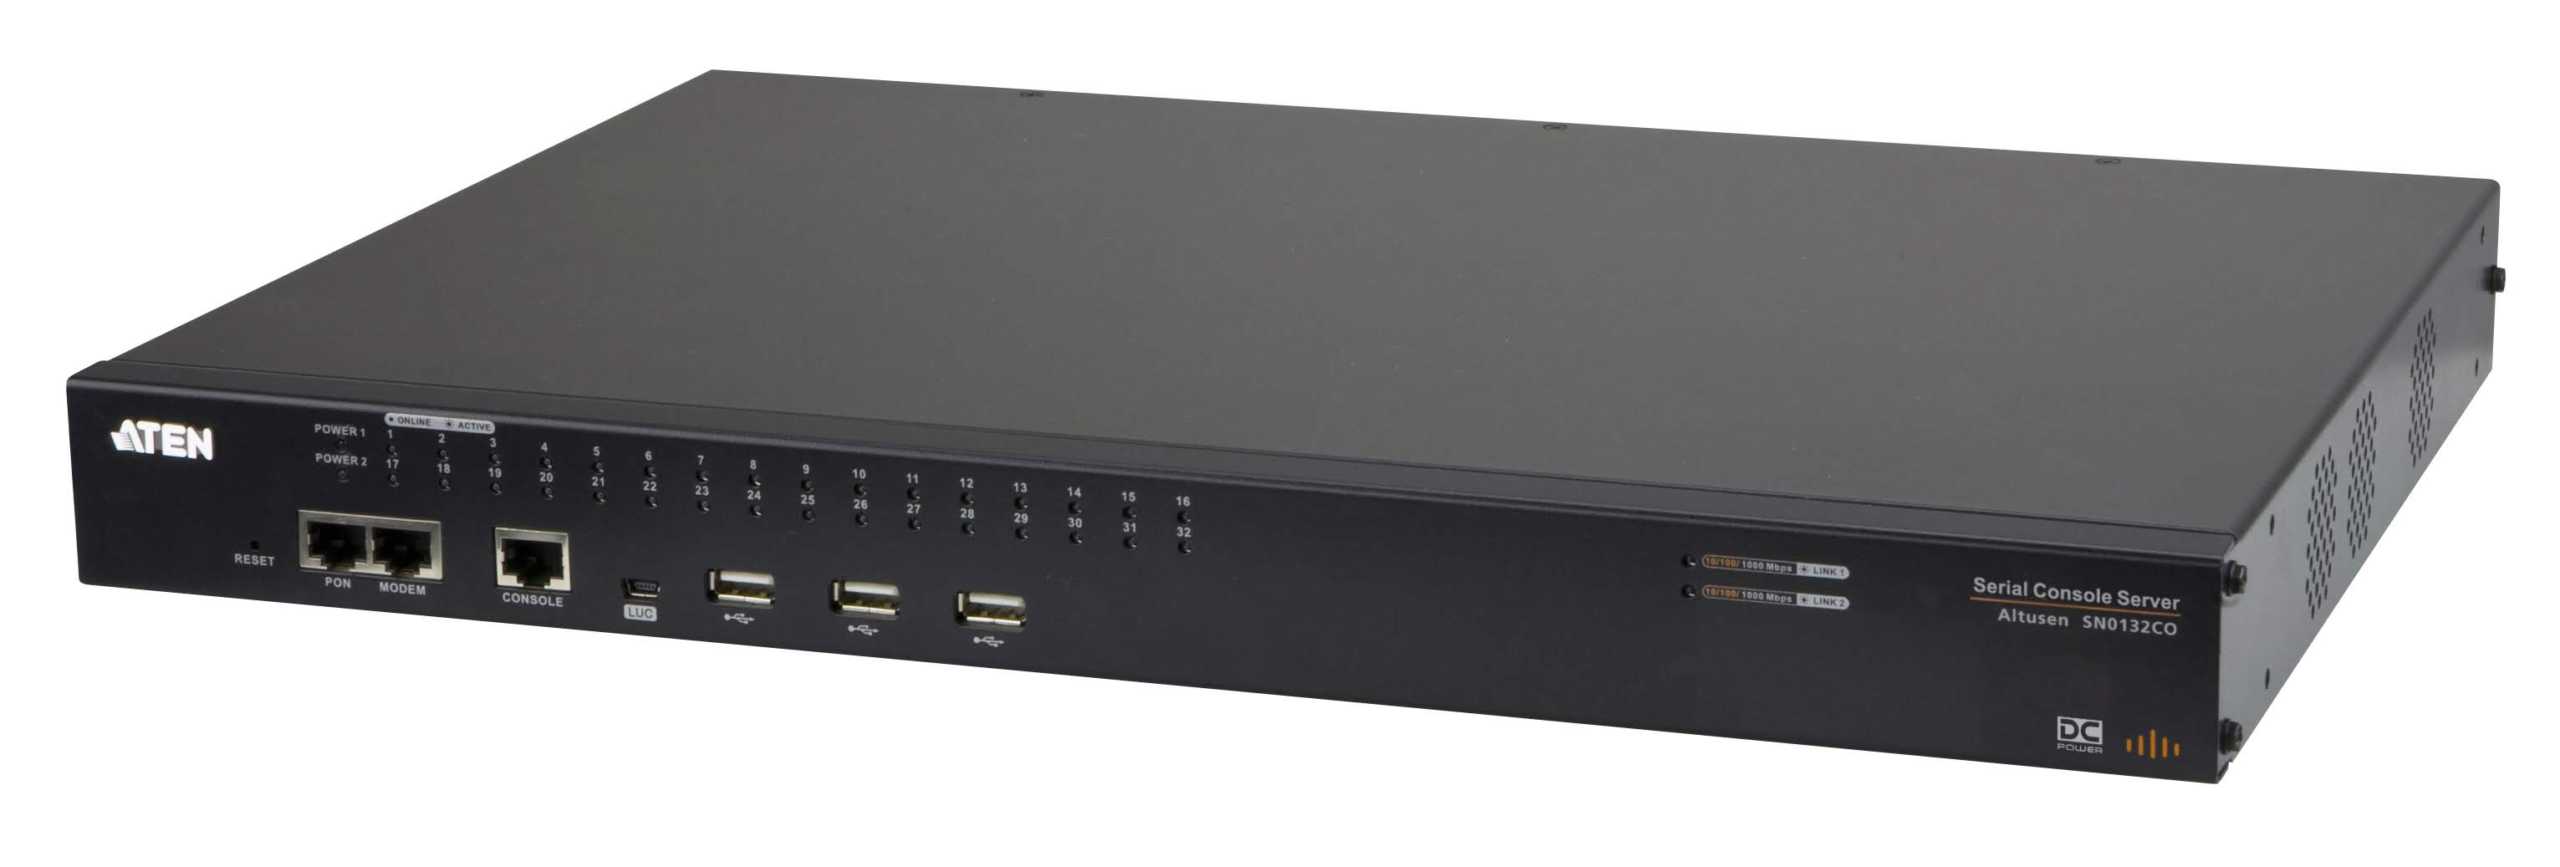 ATEN launches 16, 32 -Port Serial Console Server for Data Centers